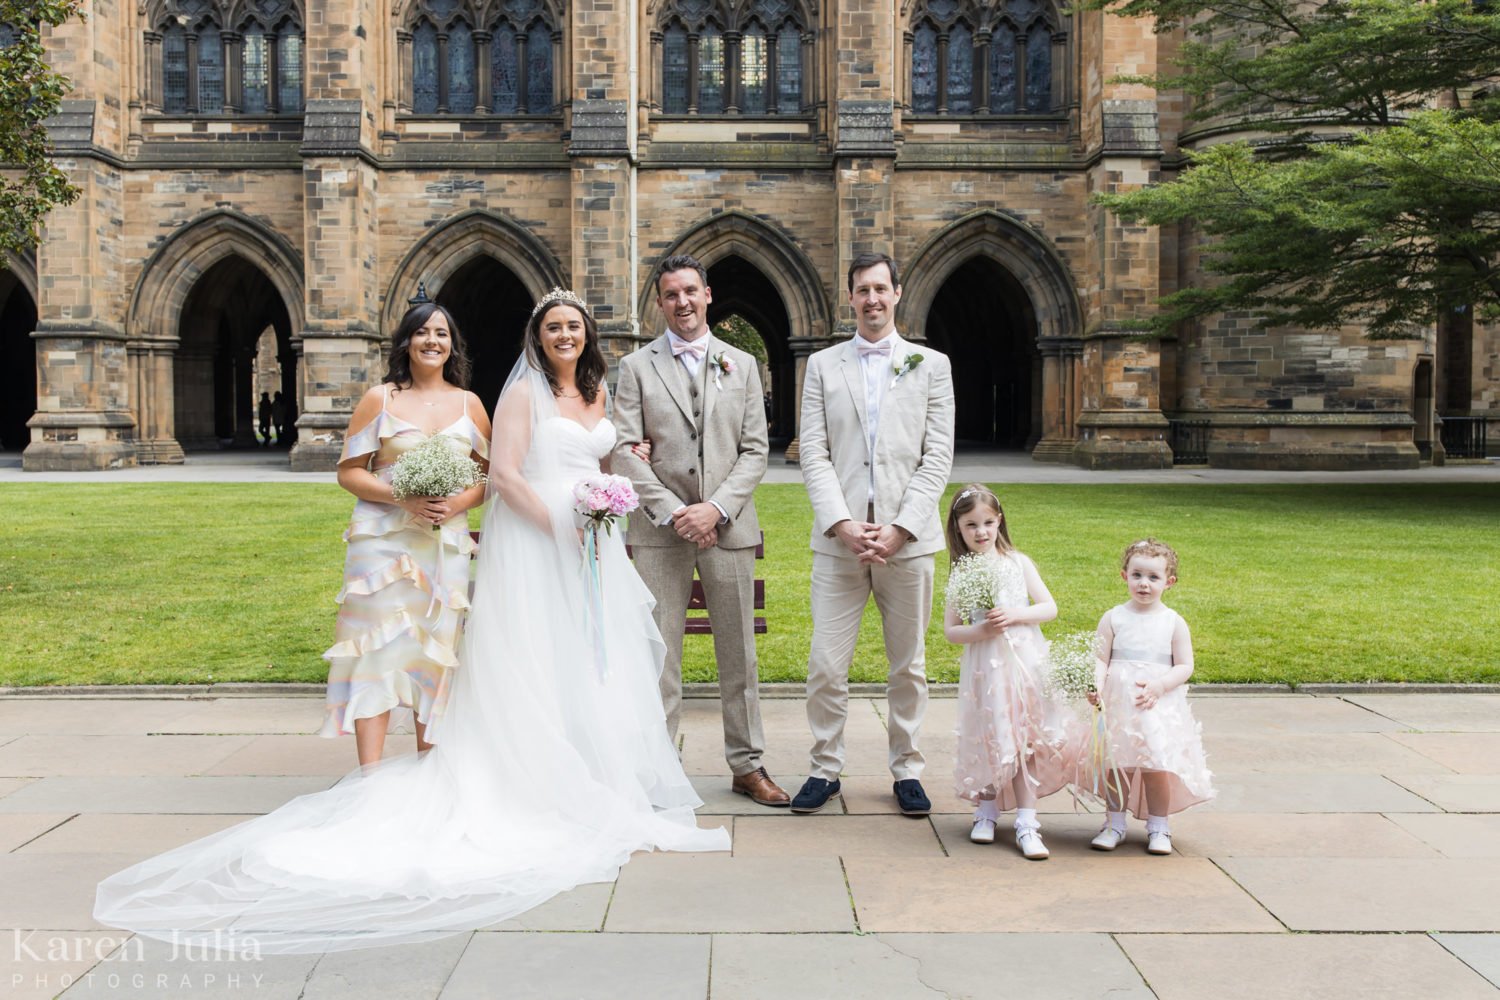 Wedding party group photo in the Quadrangle at University of Glasgow